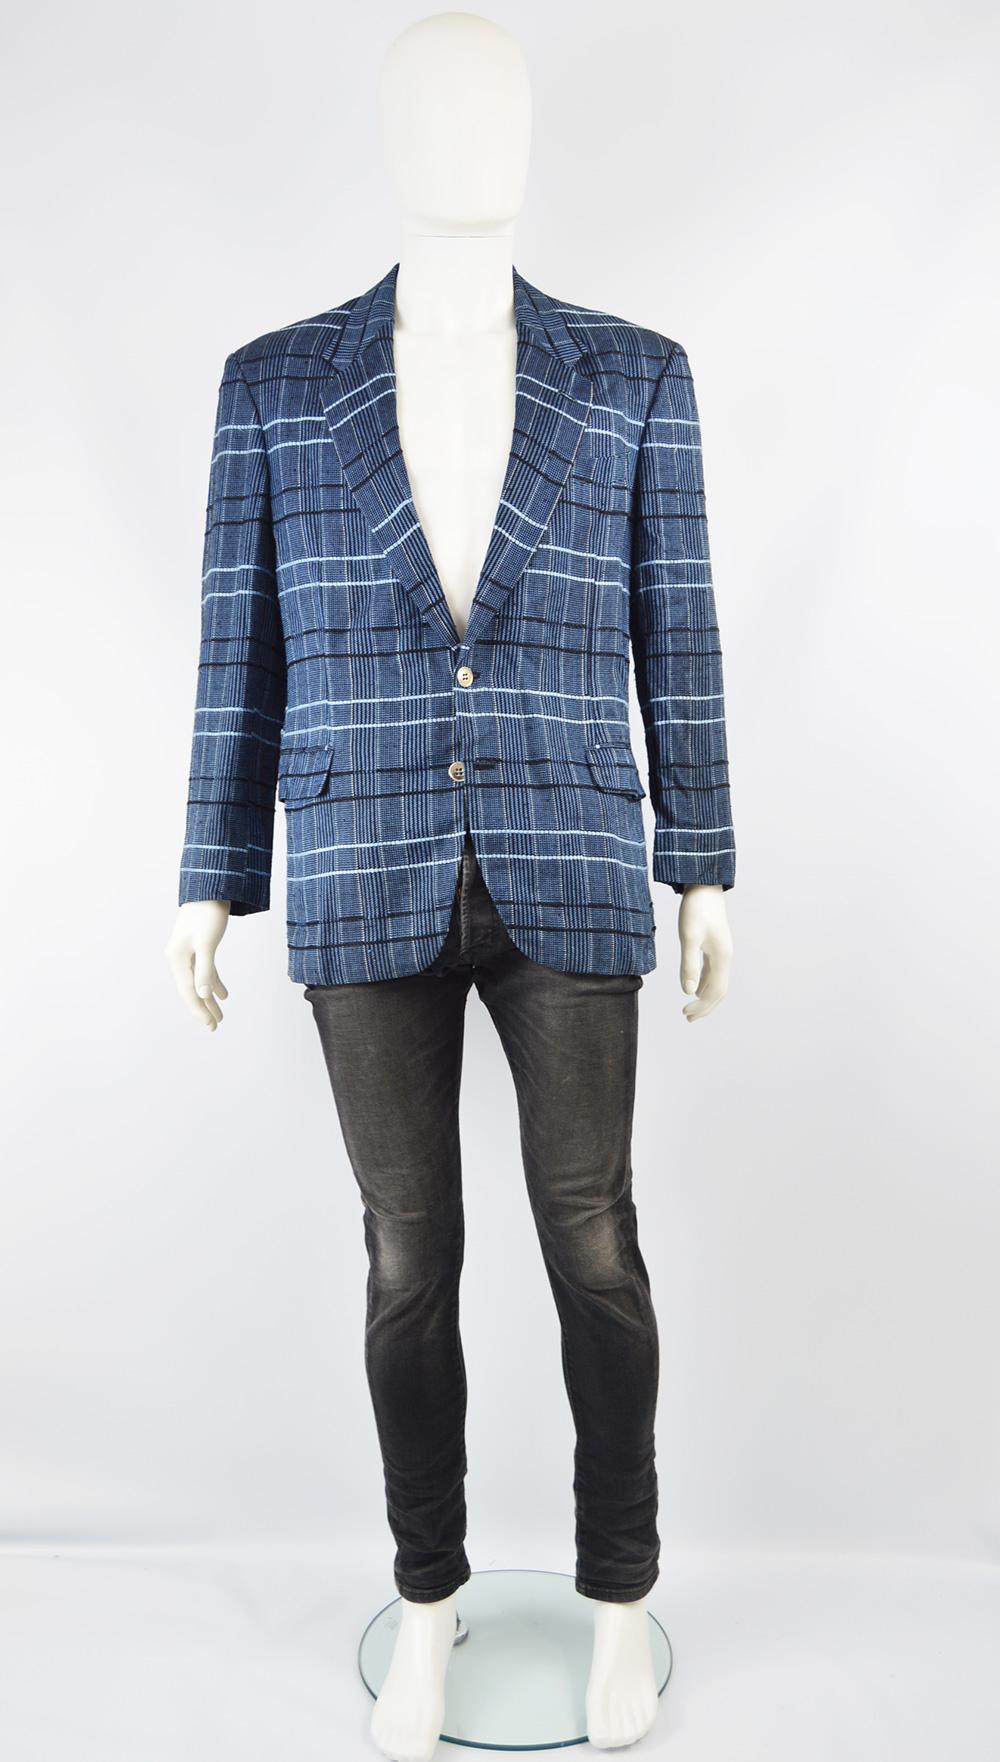 A stylish vintage men's blazer jacket / sportcoat from the 90s by luxury French ready to wear label, Cacharel. In a blue and black woven viscose-linen blend. Single breasted with flap pockets and a classic design that lets the bold fabric speak for